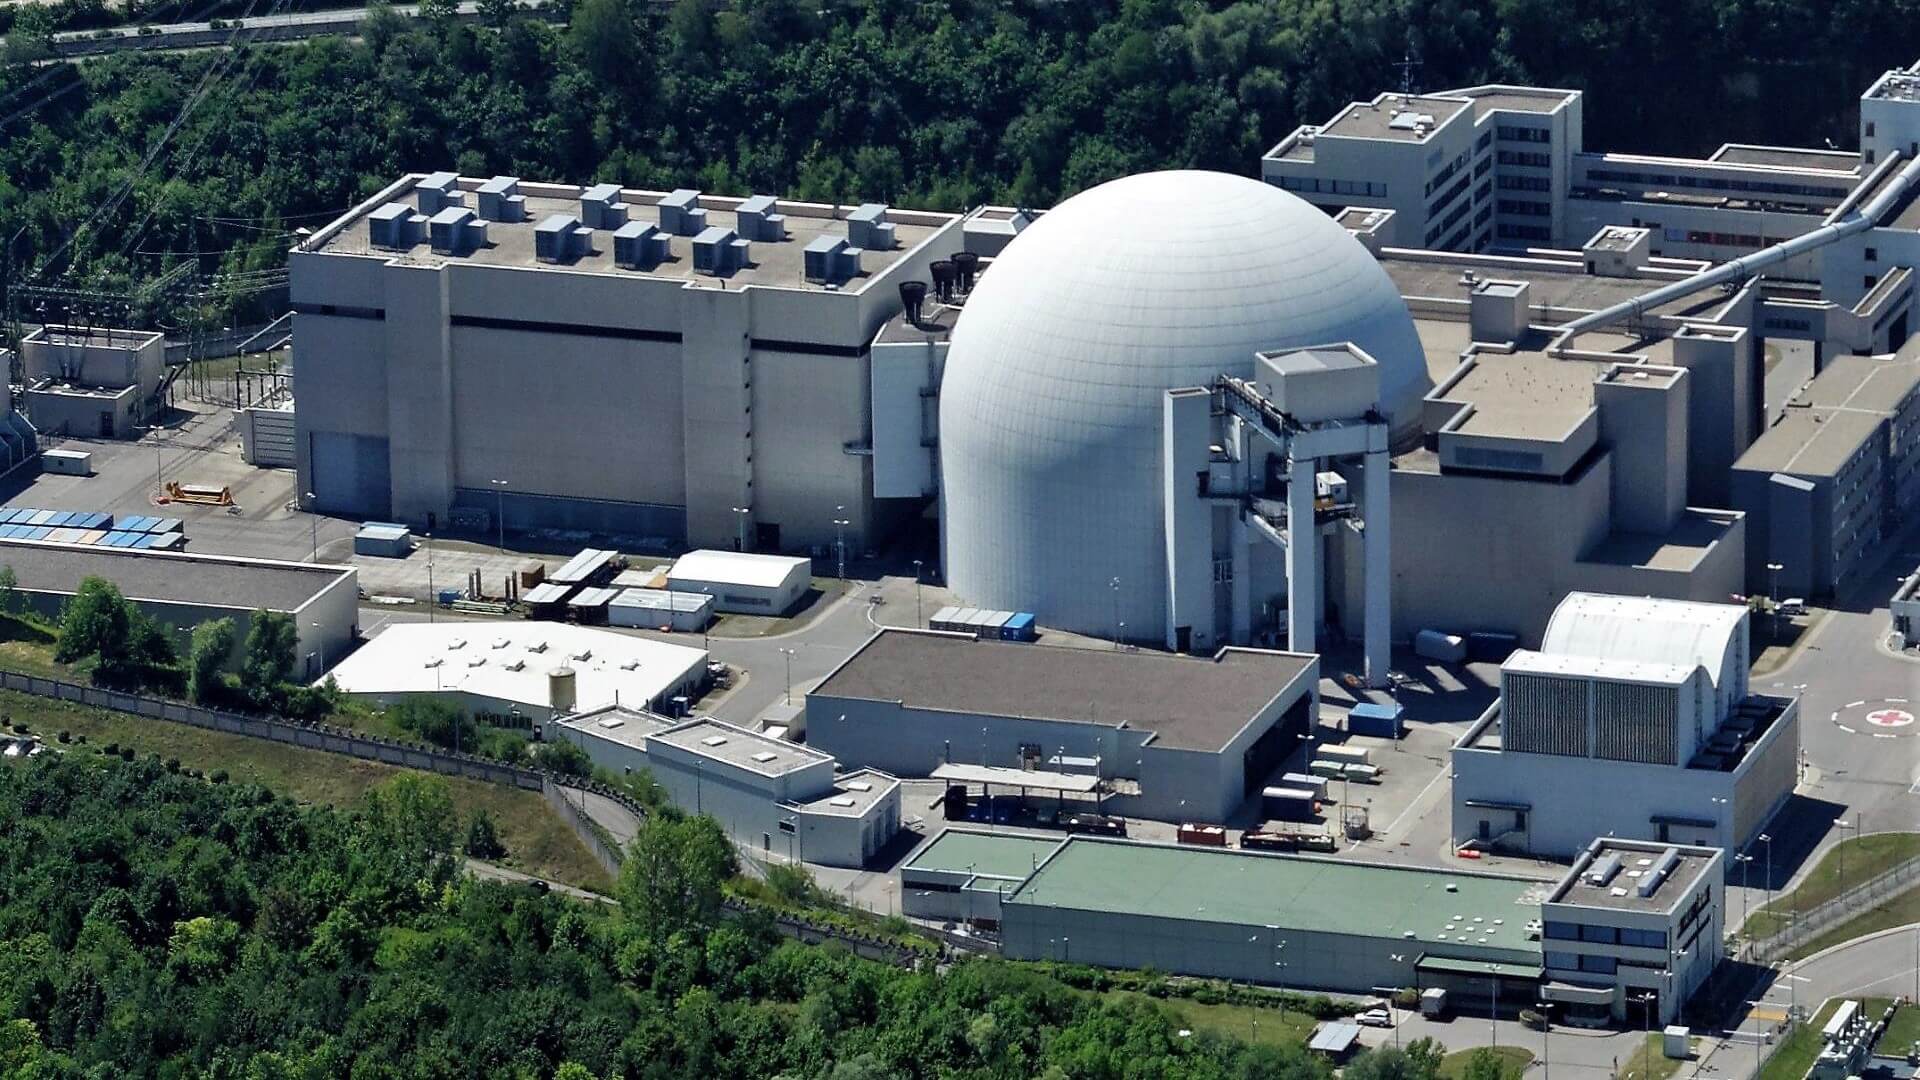 Aerial view of the GKN II nuclear plant